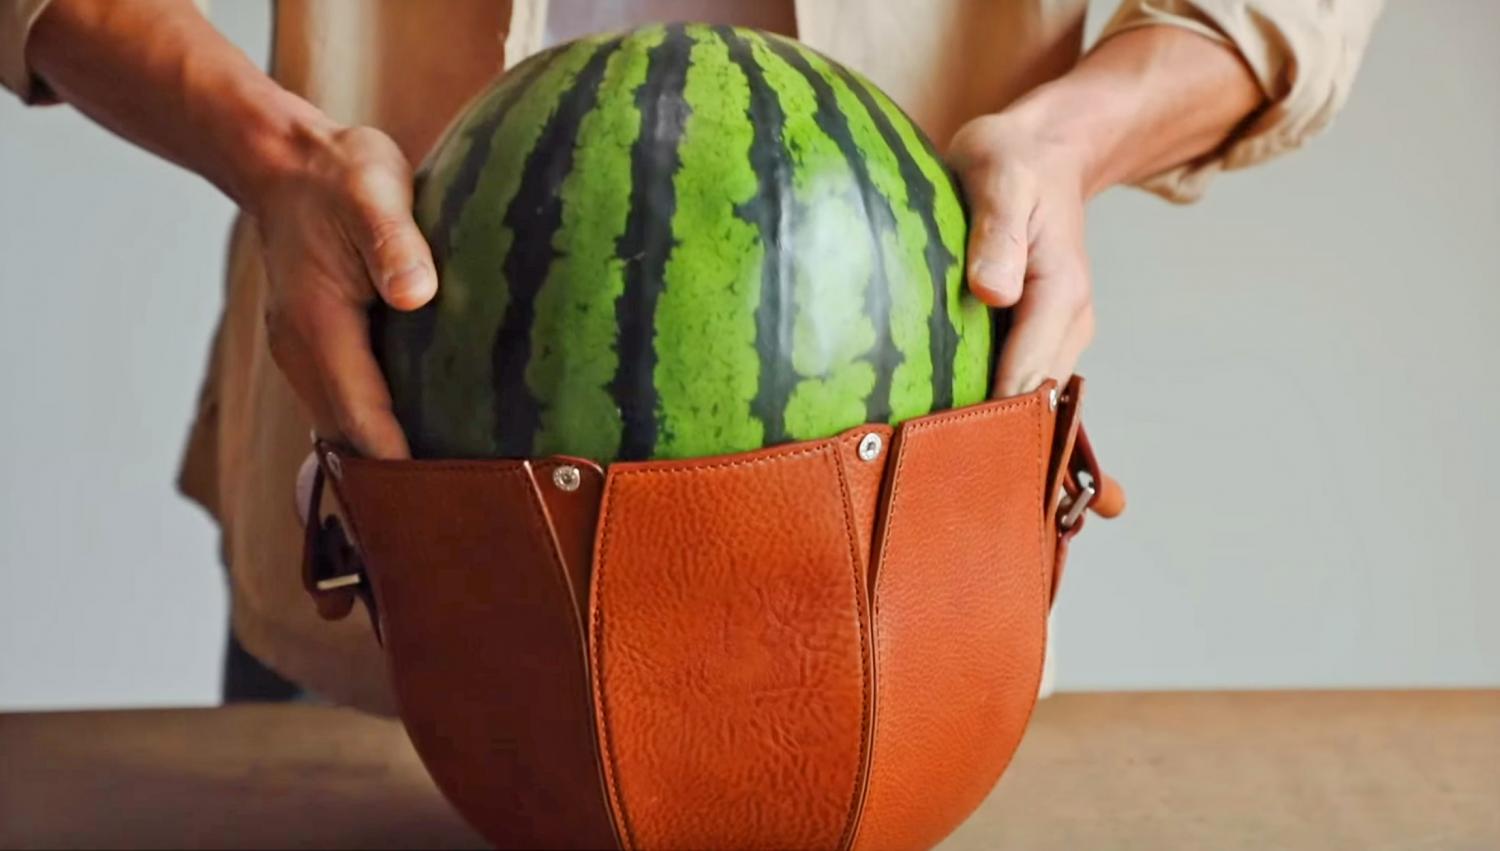 Leather Watermlon Carrier Bag - Artisan watermelon bag made from leather